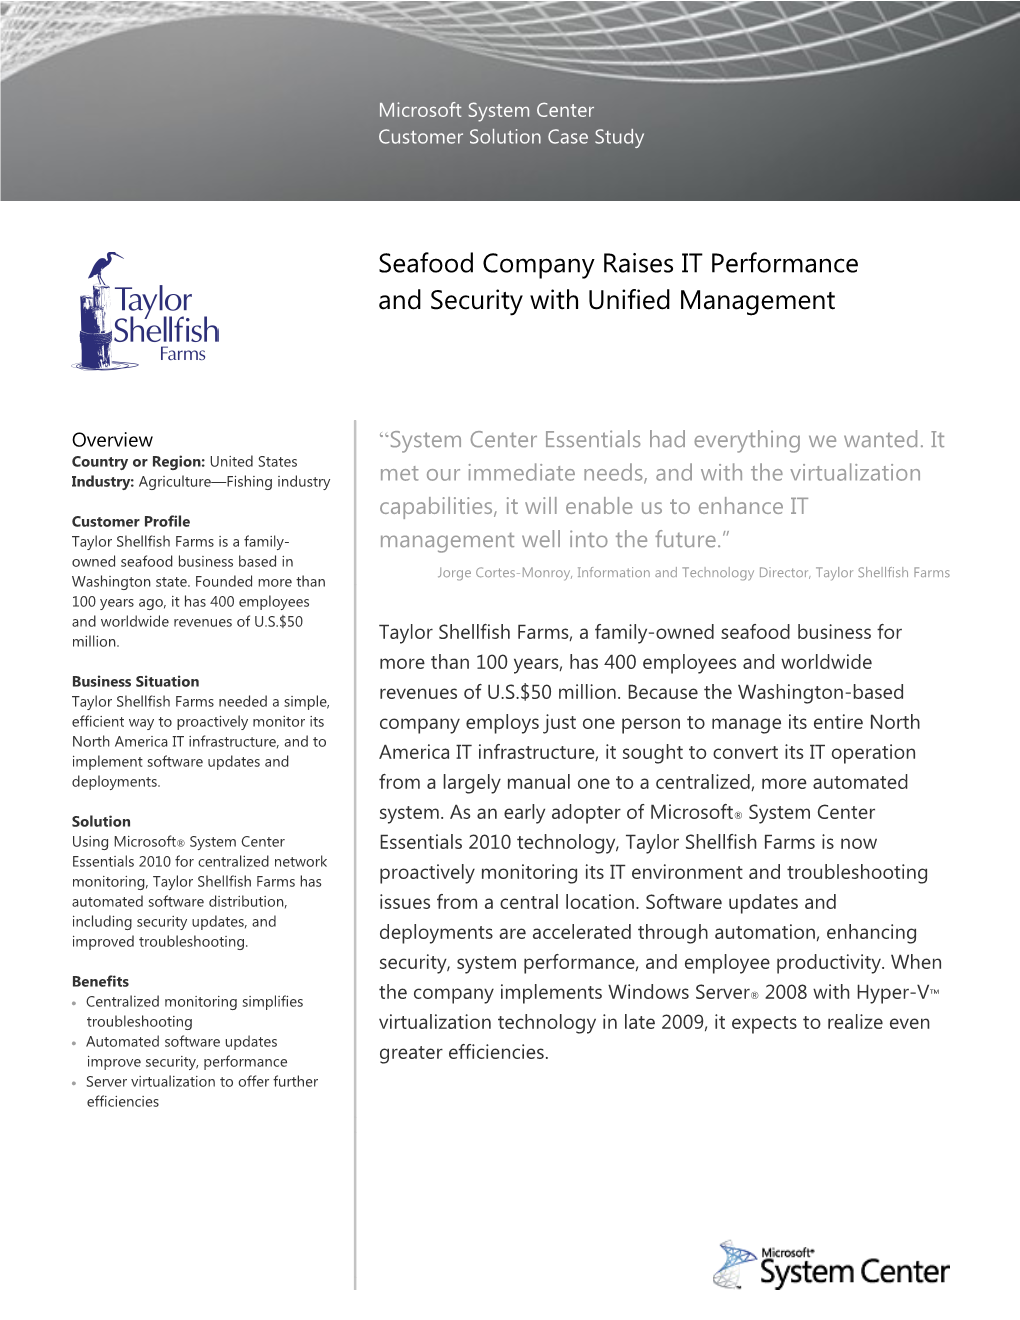 Seafood Company Raises IT Performance and Security with Unified Management